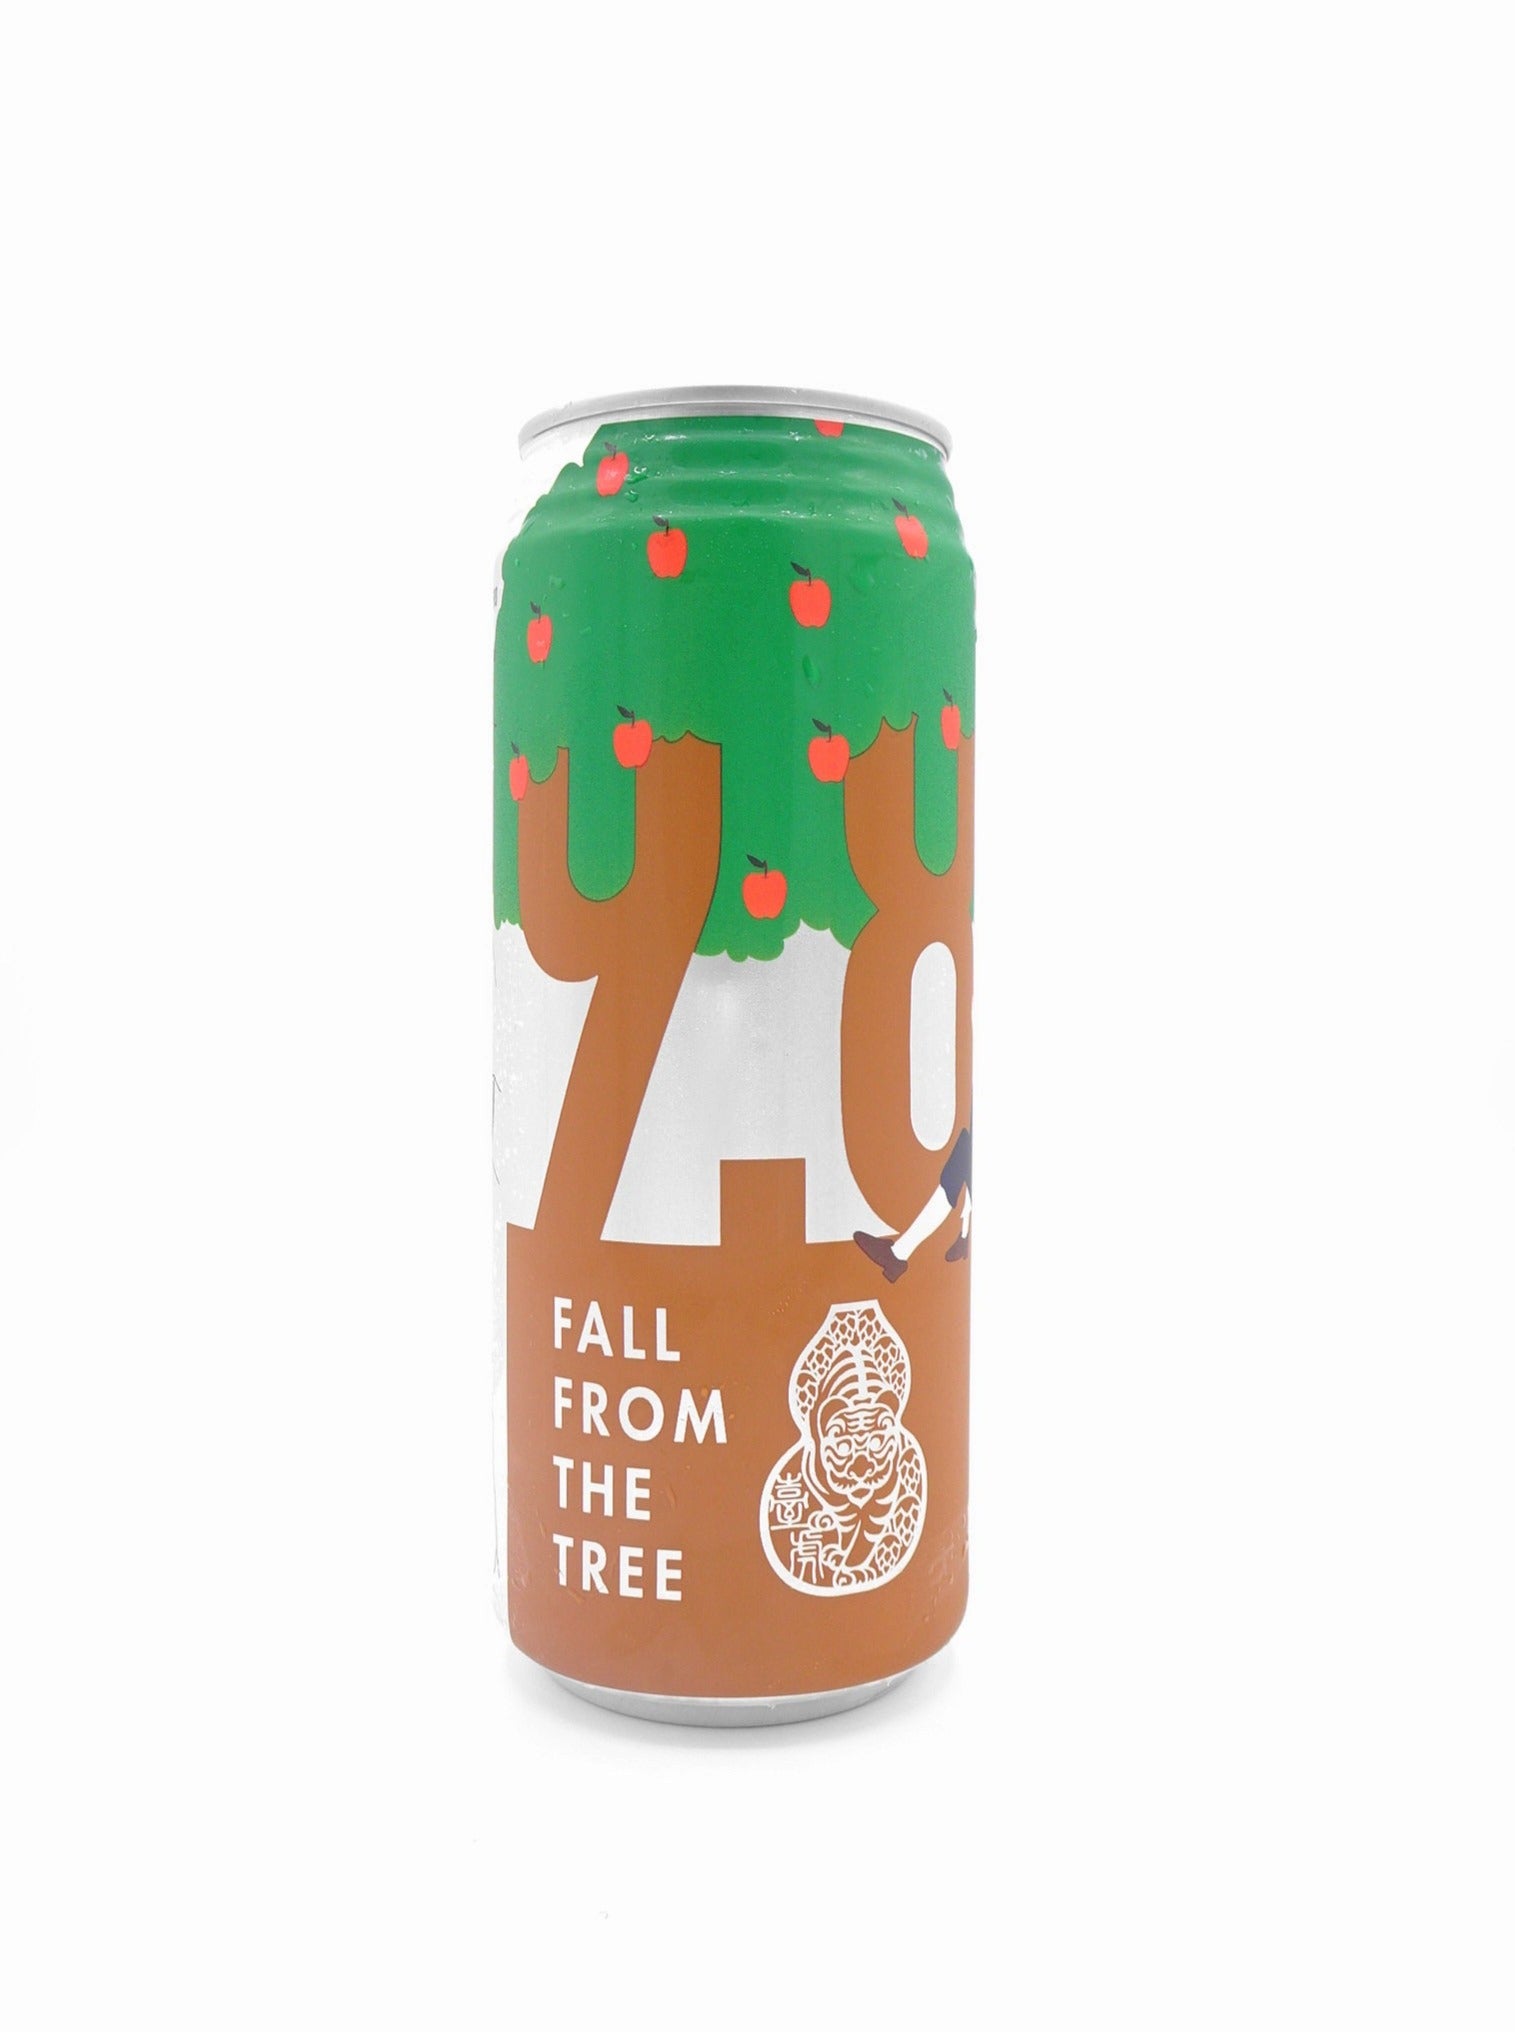 Fall From The Tree Fruited Ale／フォールフロムザツリー フルーツエール 蘋蘋乓乓